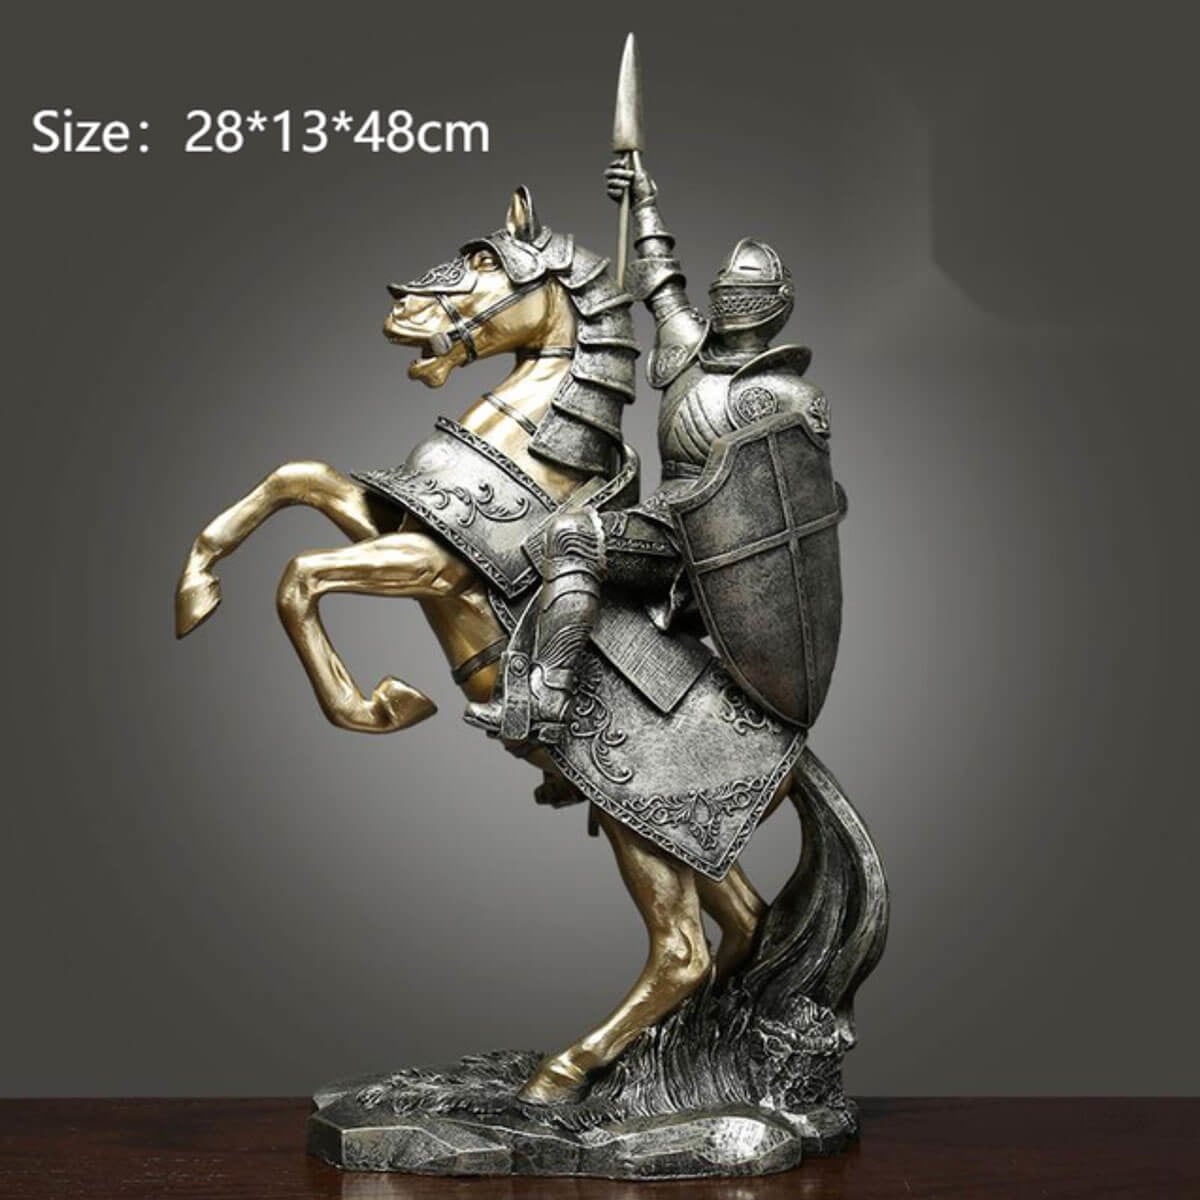 The Victory Warrior Armor Knight Sculpture